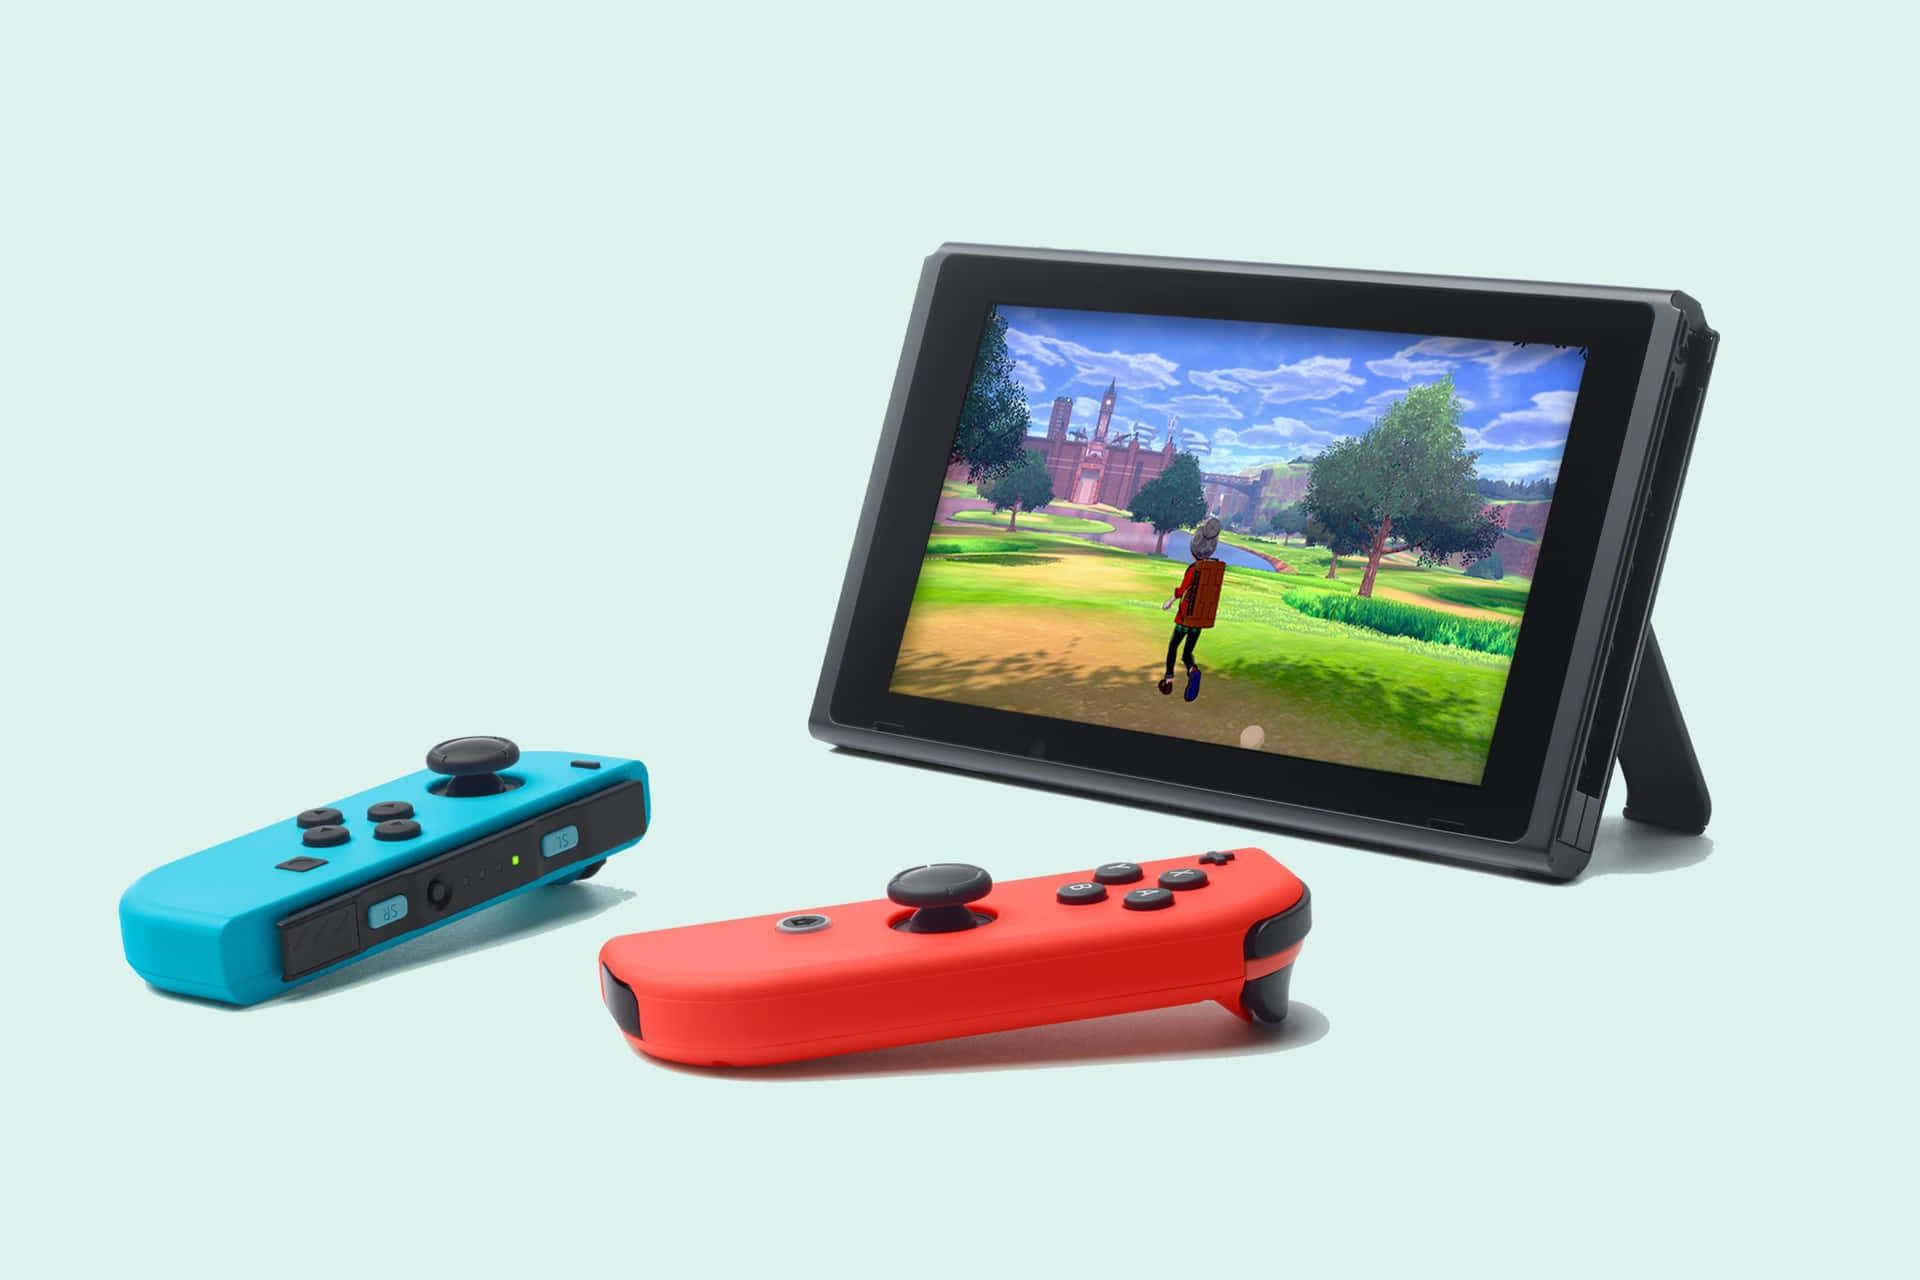 Get the most out of your gaming experience with the Nintendo Switch.